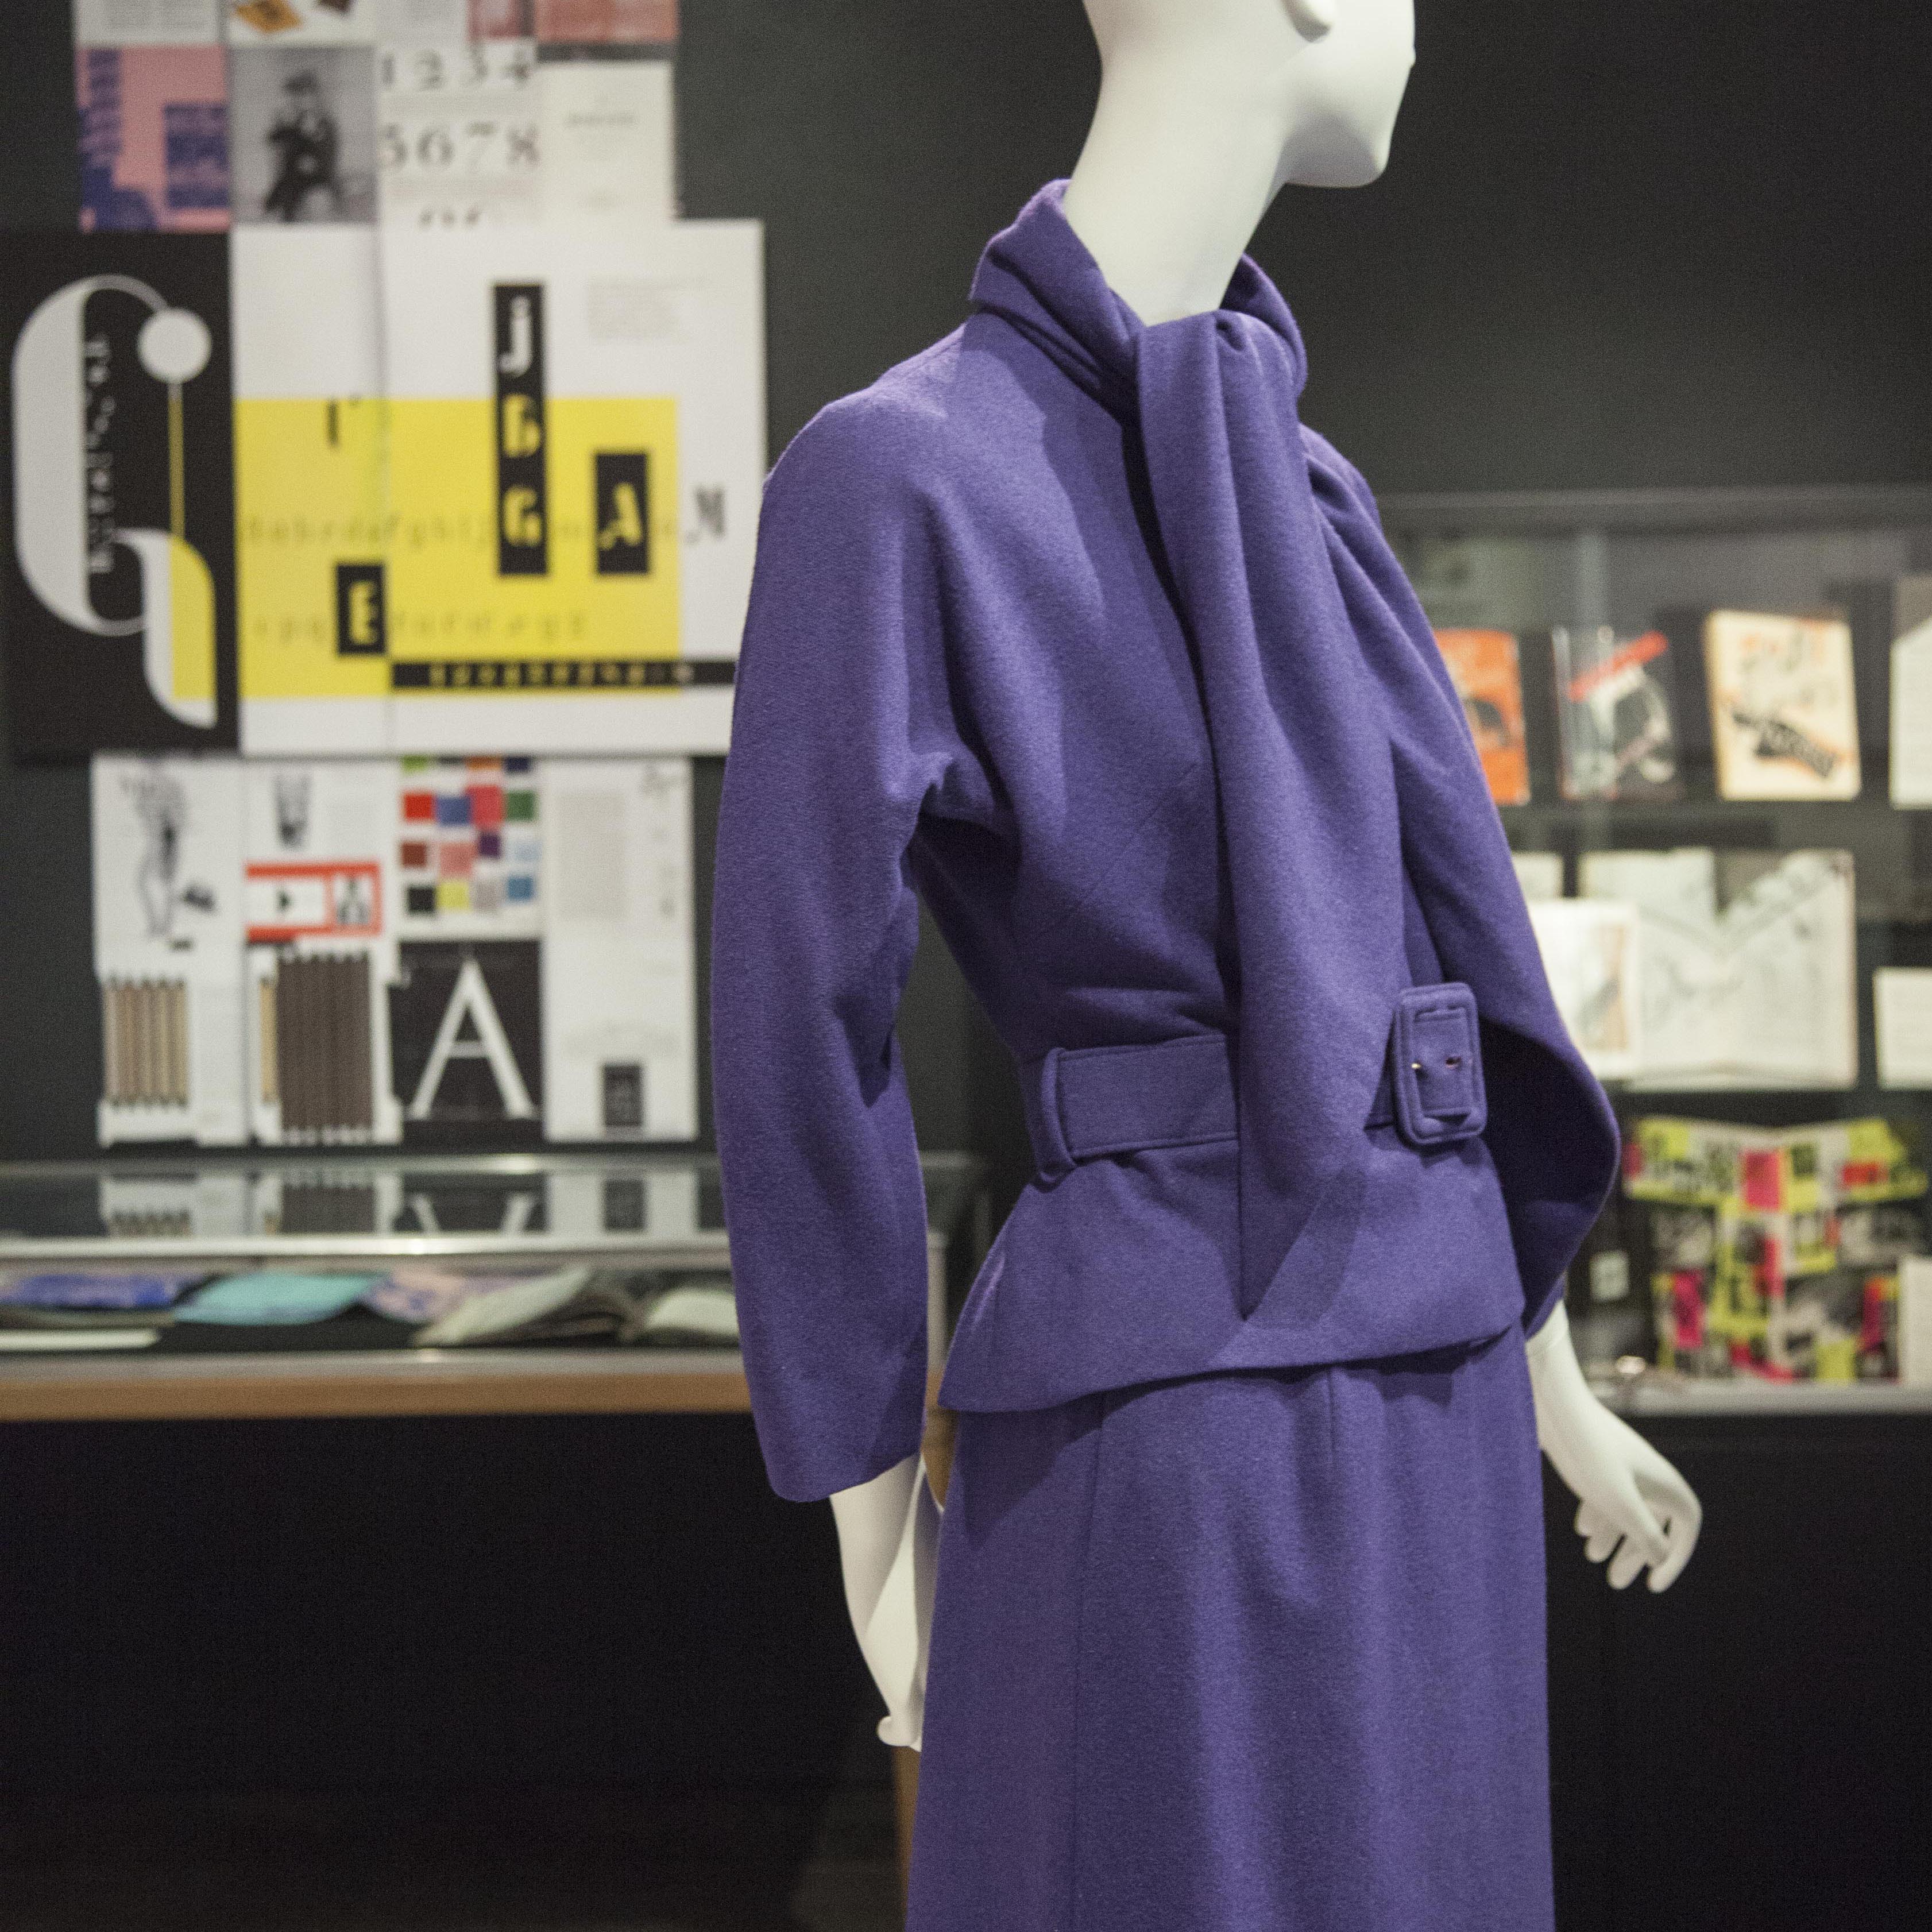 Alexey Brodovitch: Art Director magazines and fashion on display